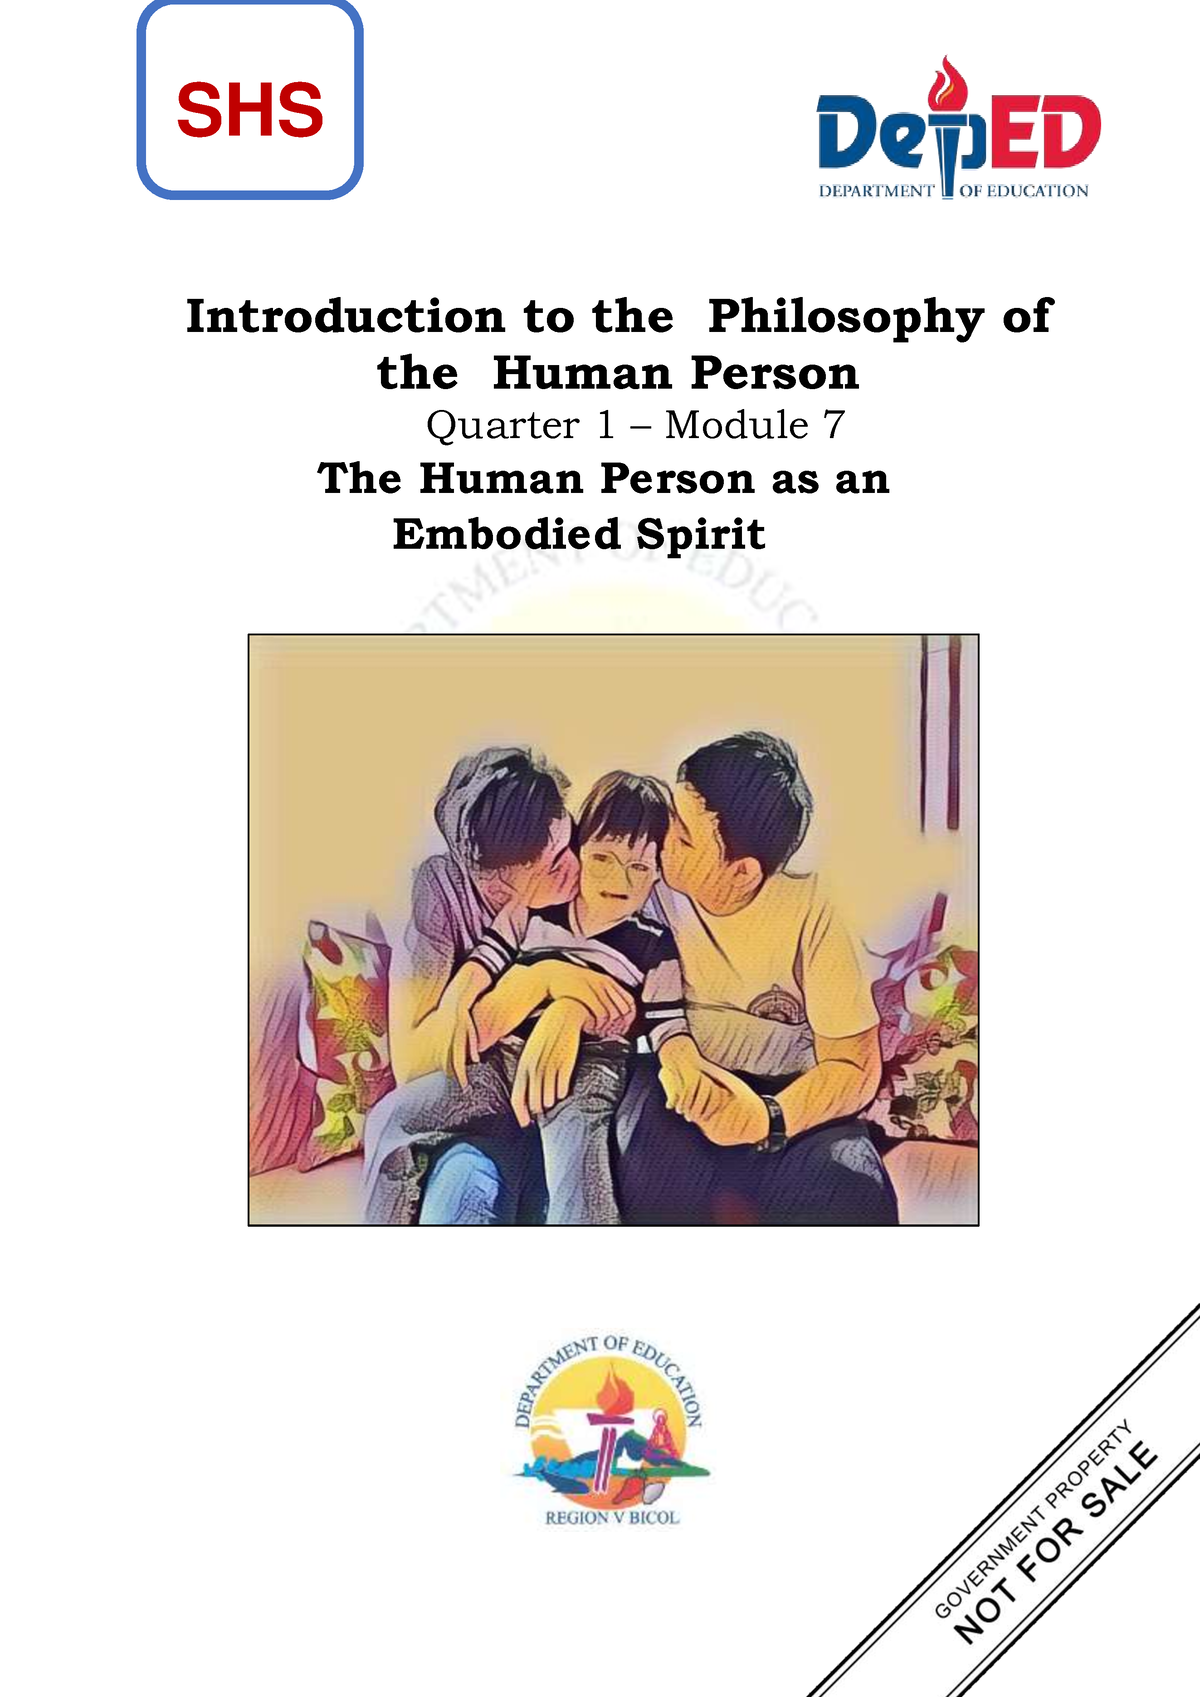 Philo Q1 M7 Heyyooo Introduction To The Philosophy Of The Human Person Quarter 1 Module 7 4867